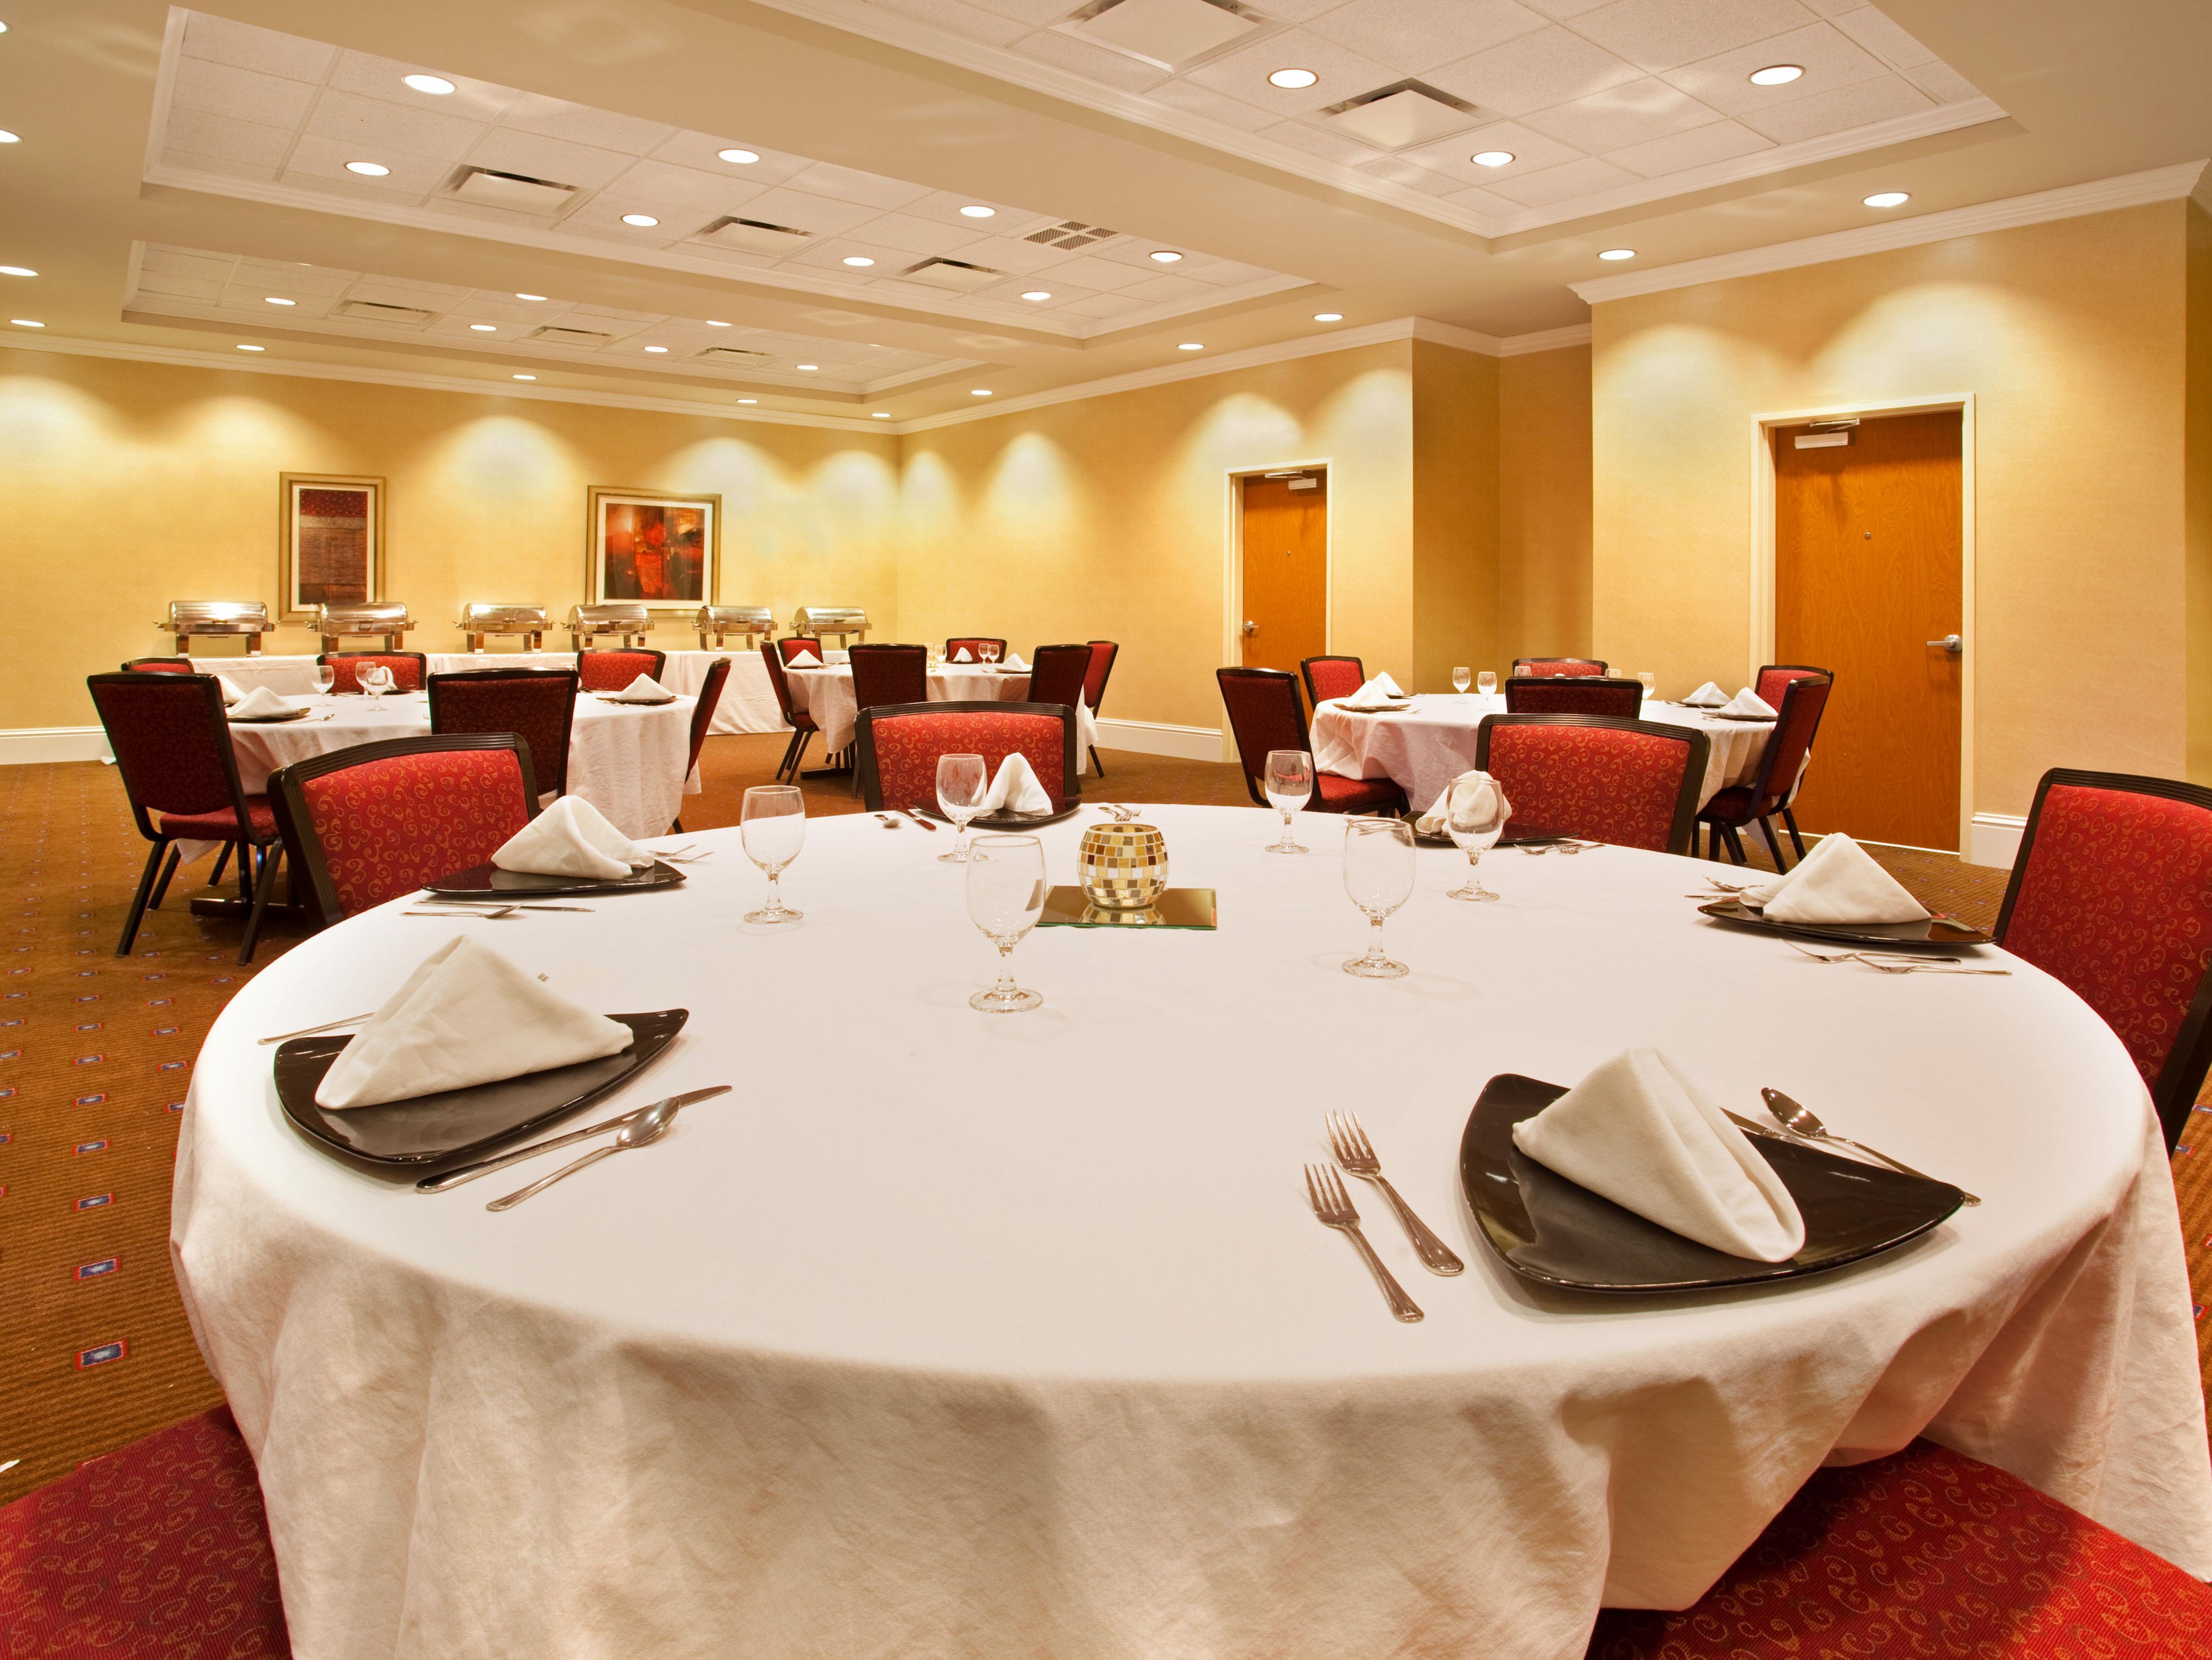 Looking for a place to host your next meeting or event? Look no further. Our customizable 2,000 sq. ft. meeting space may be just what you are looking for. This space is sure to impress, so contact our sales specialist to discuss your needs today.